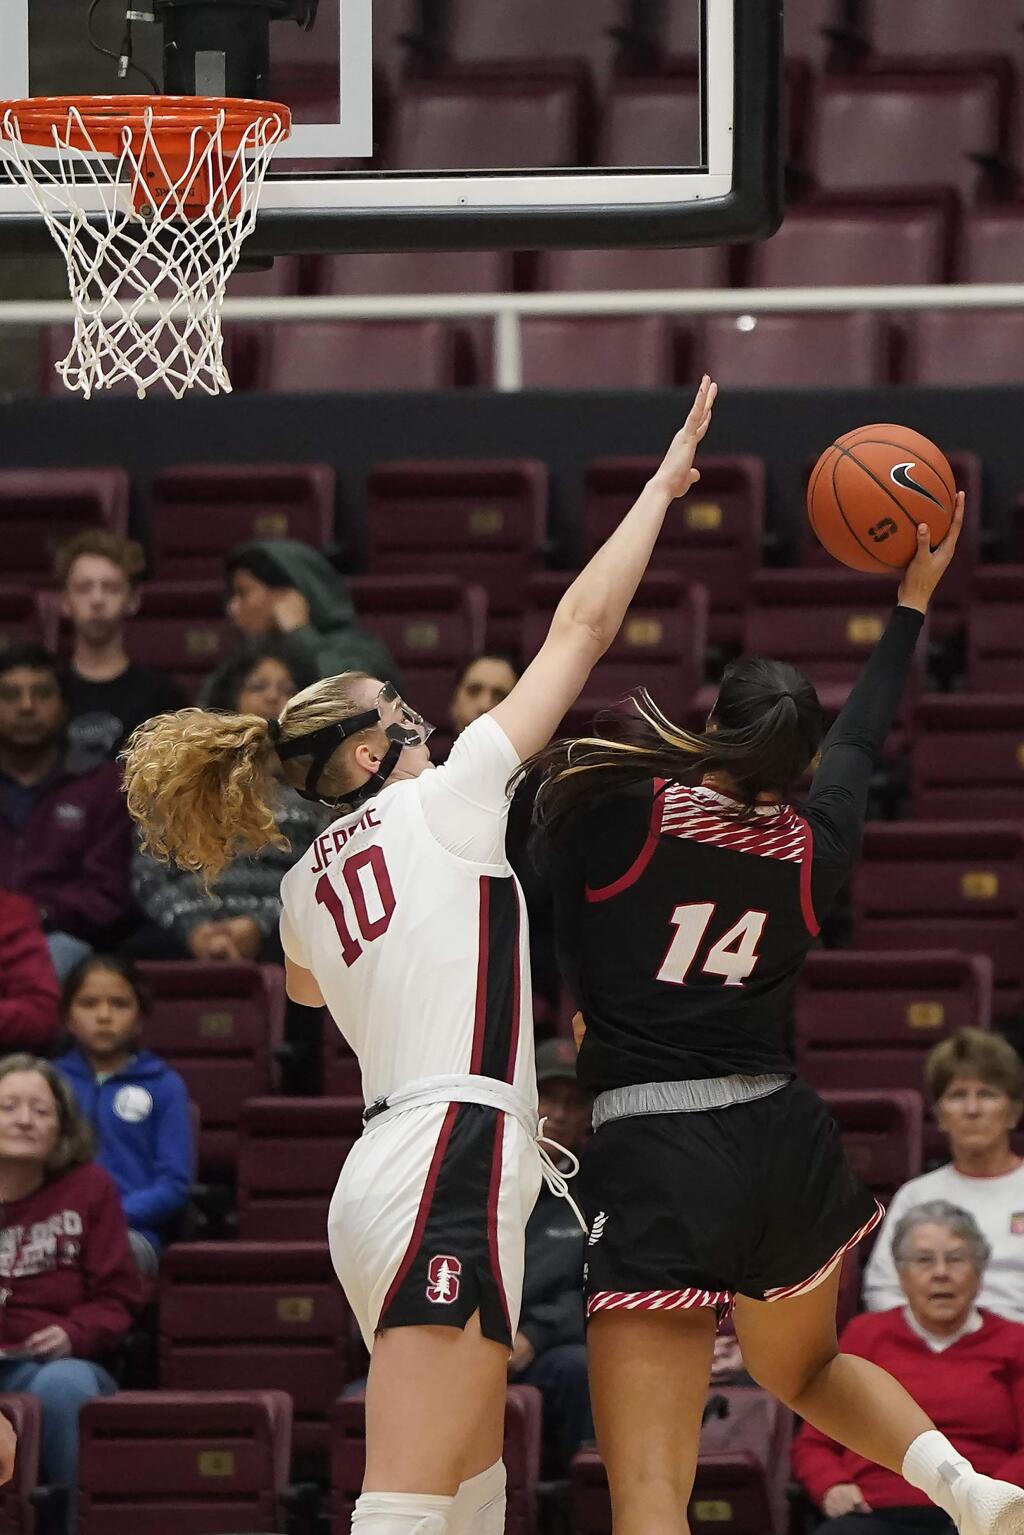 Stanford forward Alyssa Jerome (10) blocks a shot by Eastern Washington center Bella Cravens (14) during the first half of an NCAA college basketball game Tuesday, Nov. 5, 2019, in Stanford, Calif. (AP Photo/Tony Avelar)